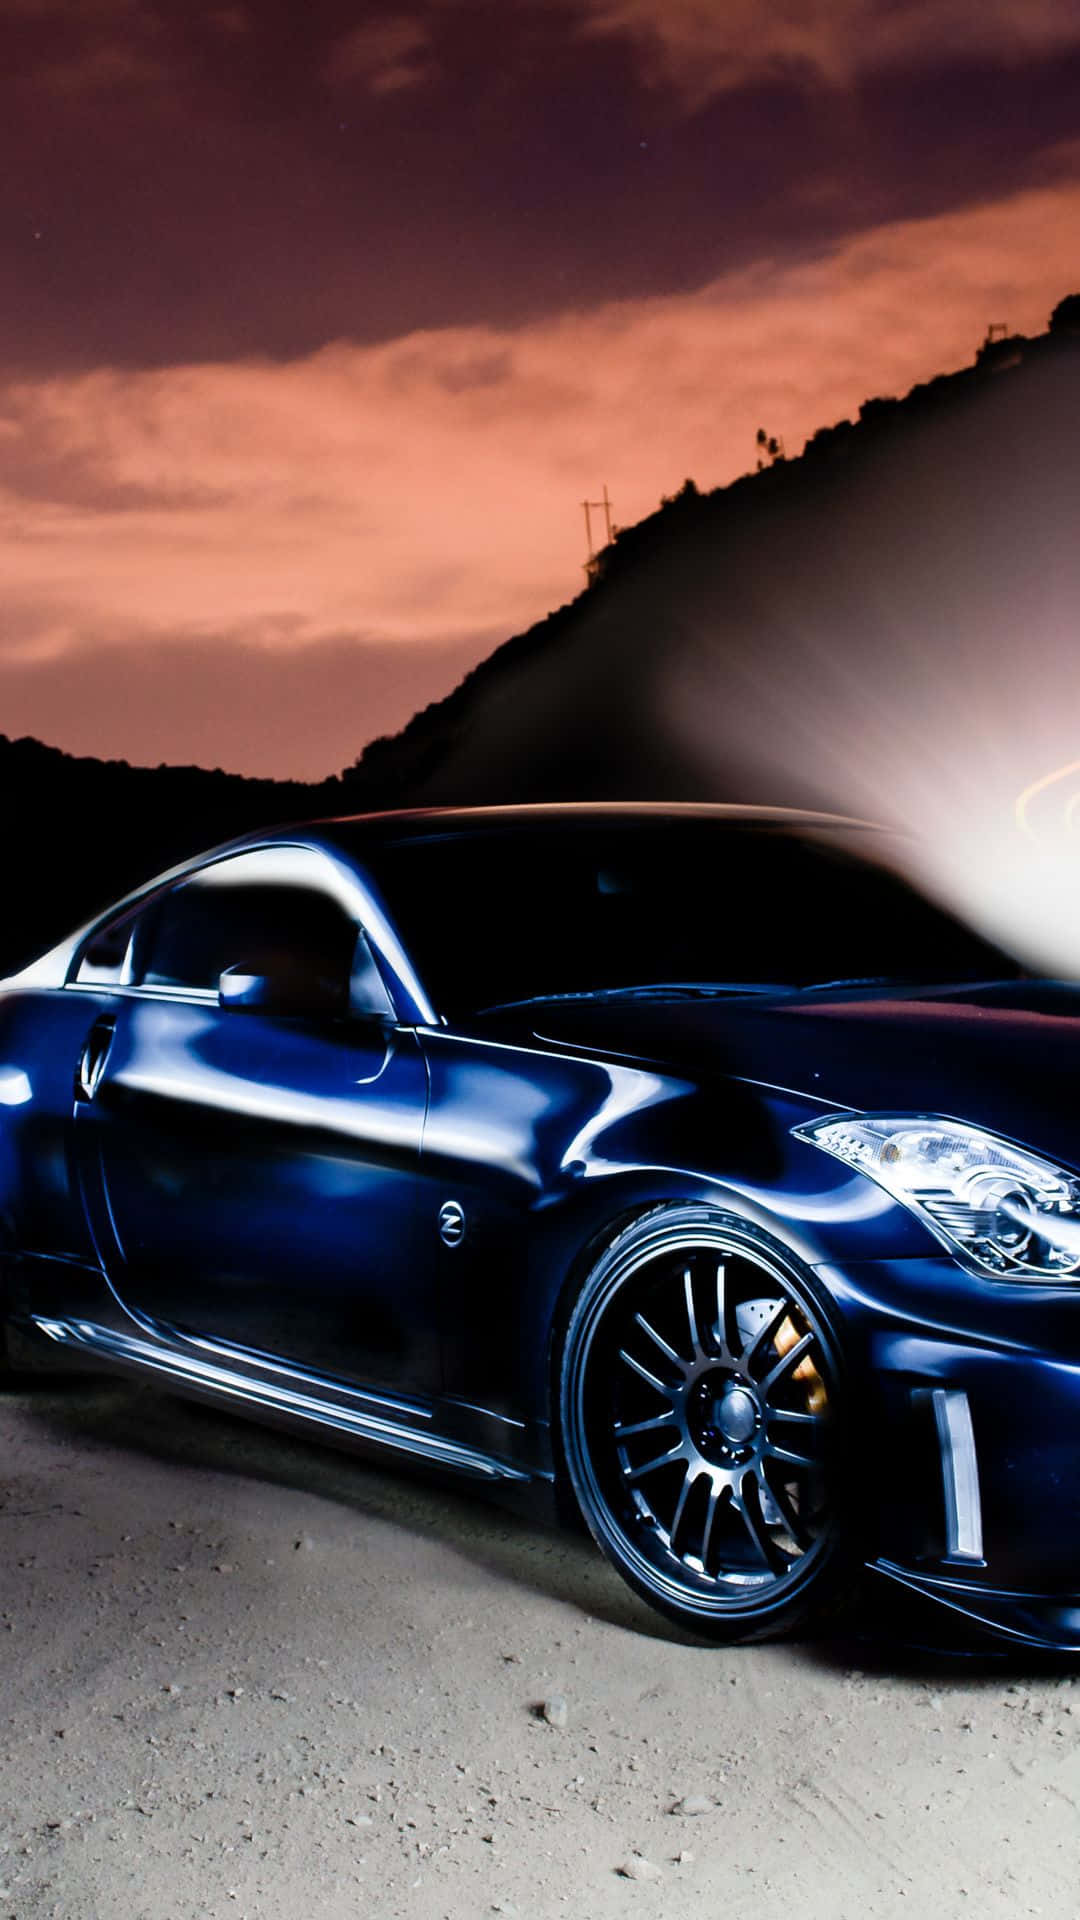 Drive the Nissan 350z Experience Differently with a New iPhone Wallpaper